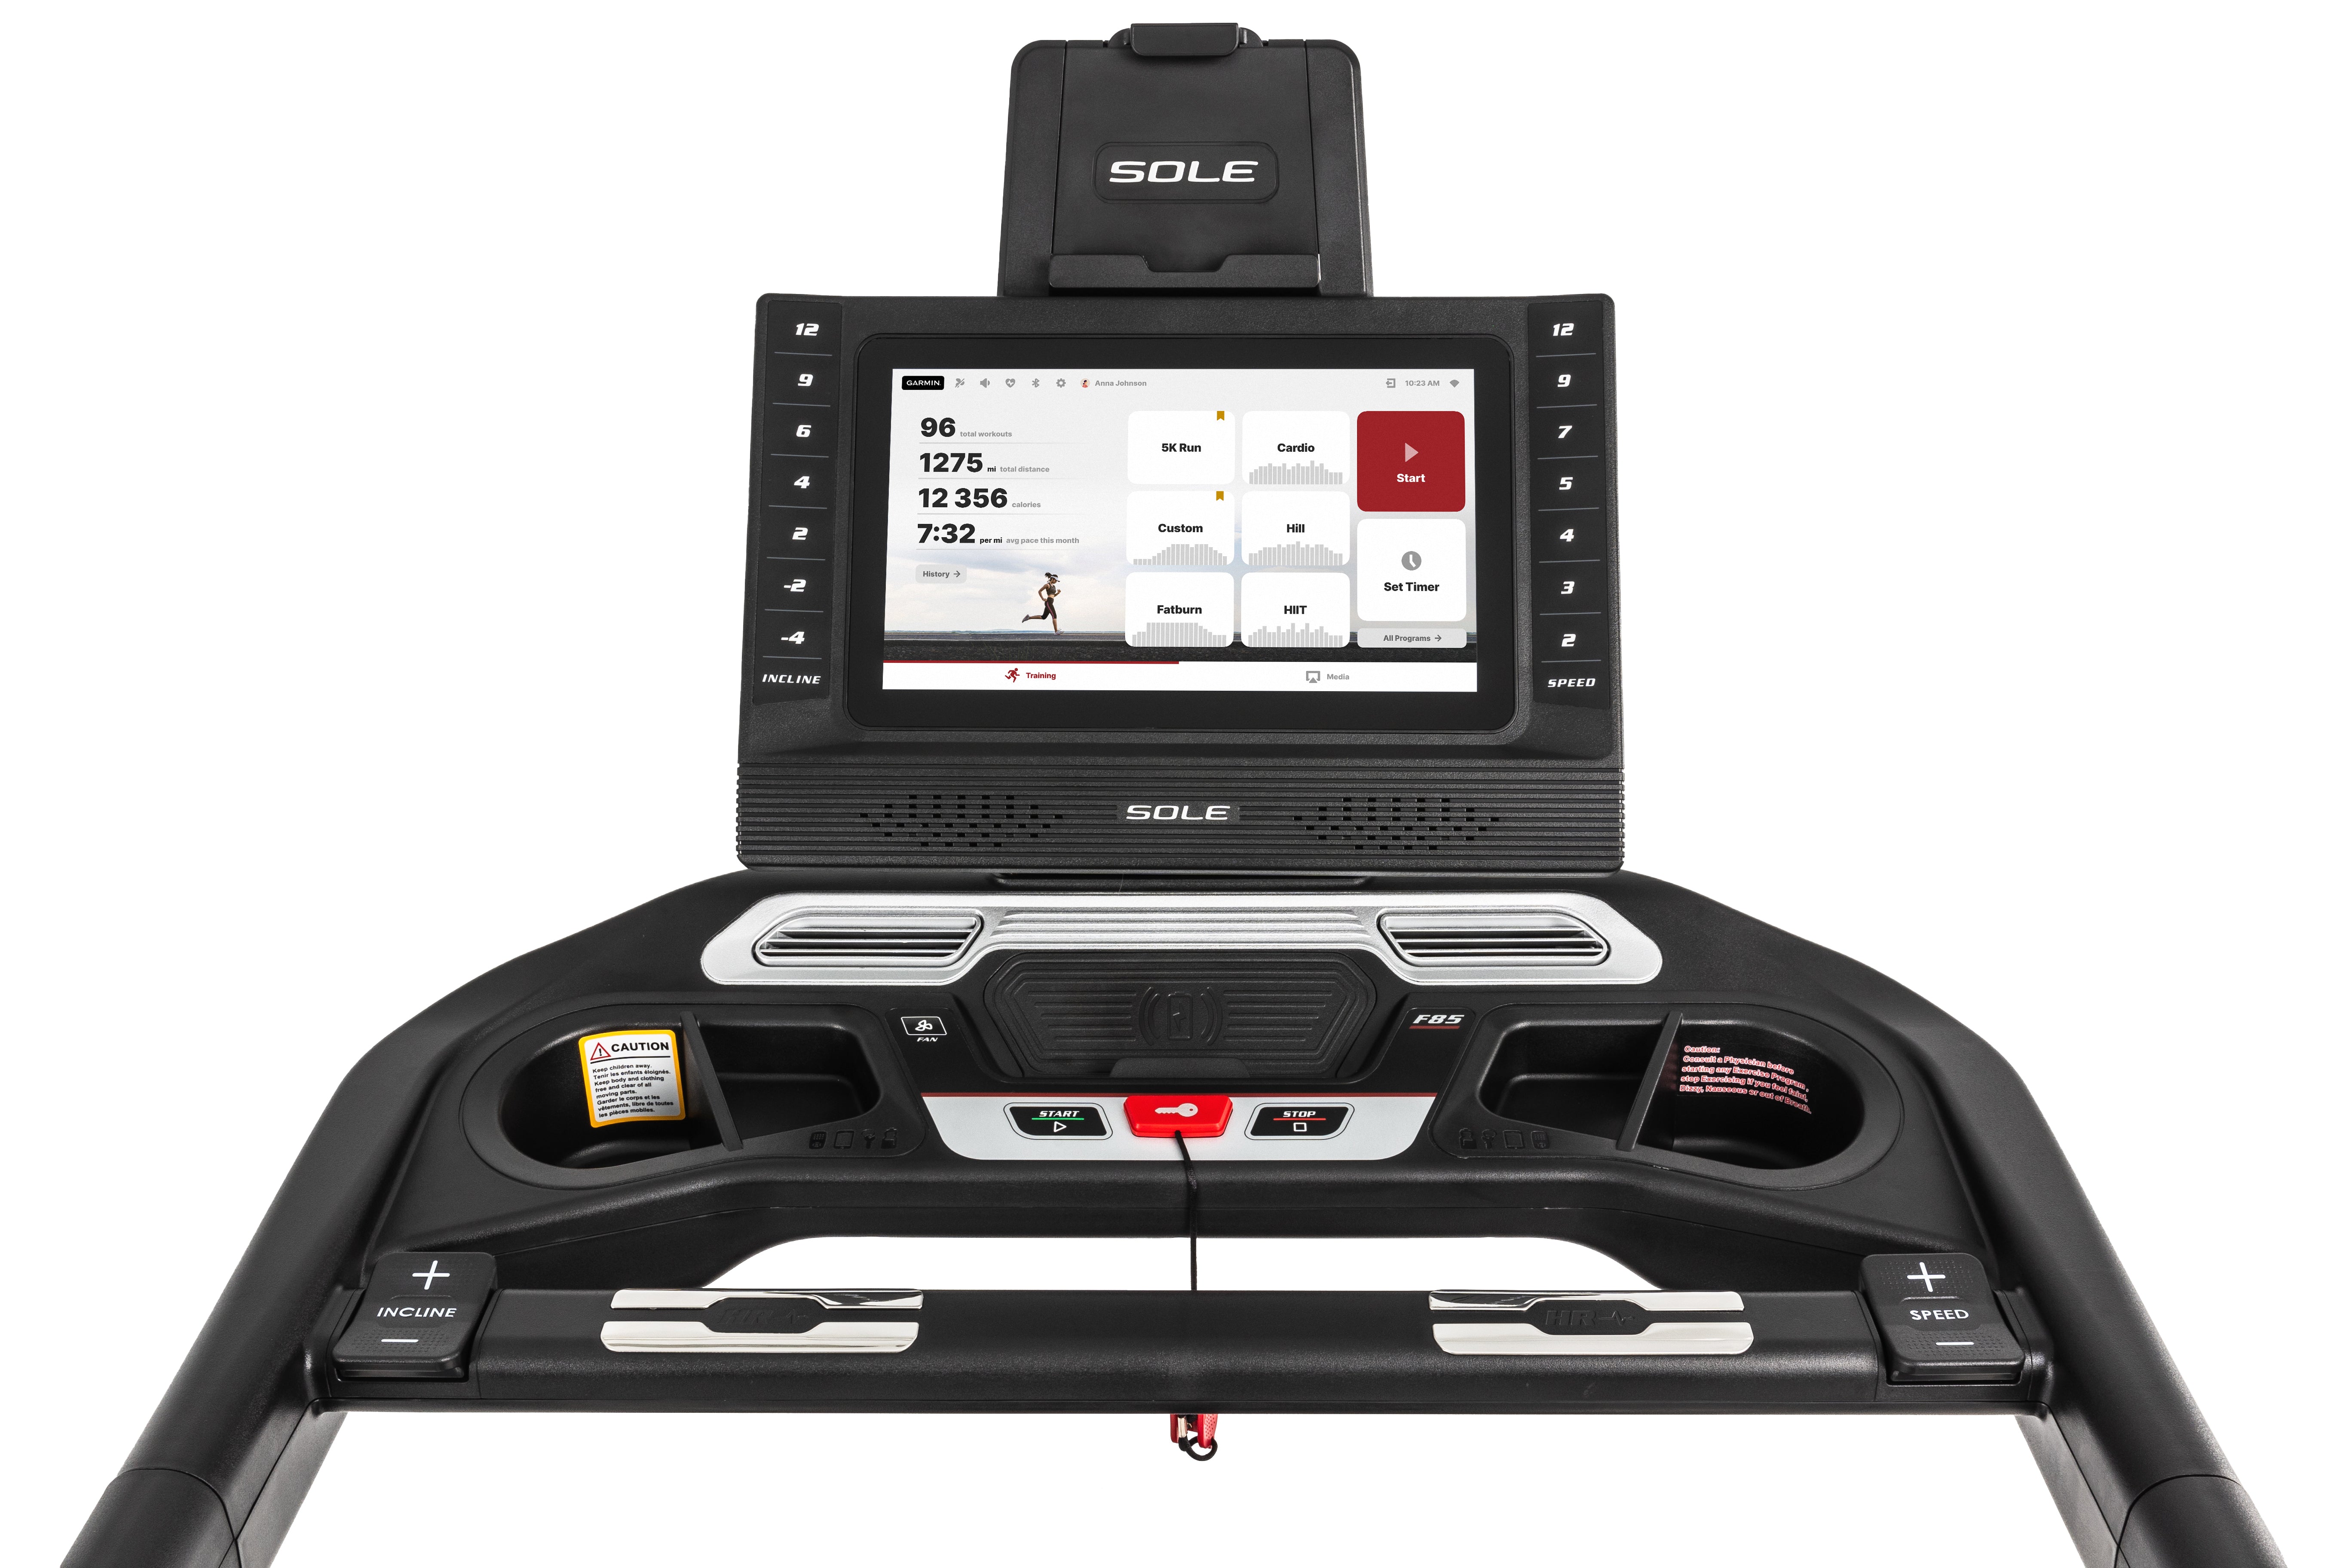 Top view of the Sole F85 treadmill console, featuring a digital display showing workout metrics, a tablet holder with the SOLE logo, and a black dashboard with controls for speed and incline adjustments, emergency stop, and labeled buttons for various functions.